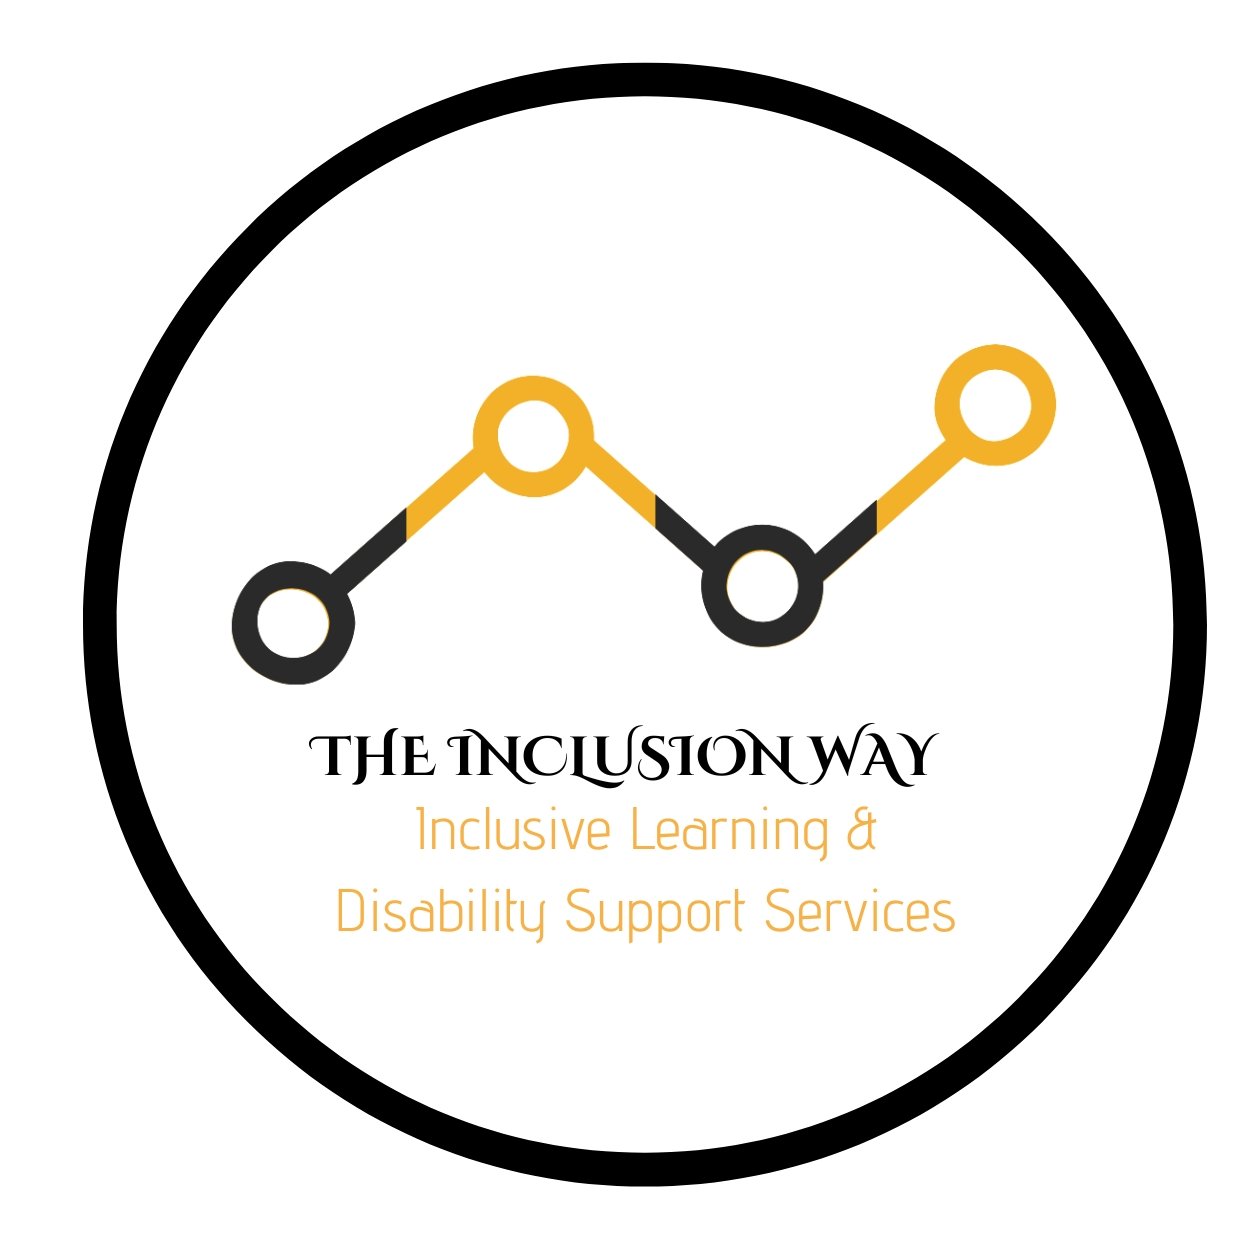 The Inclusion Way